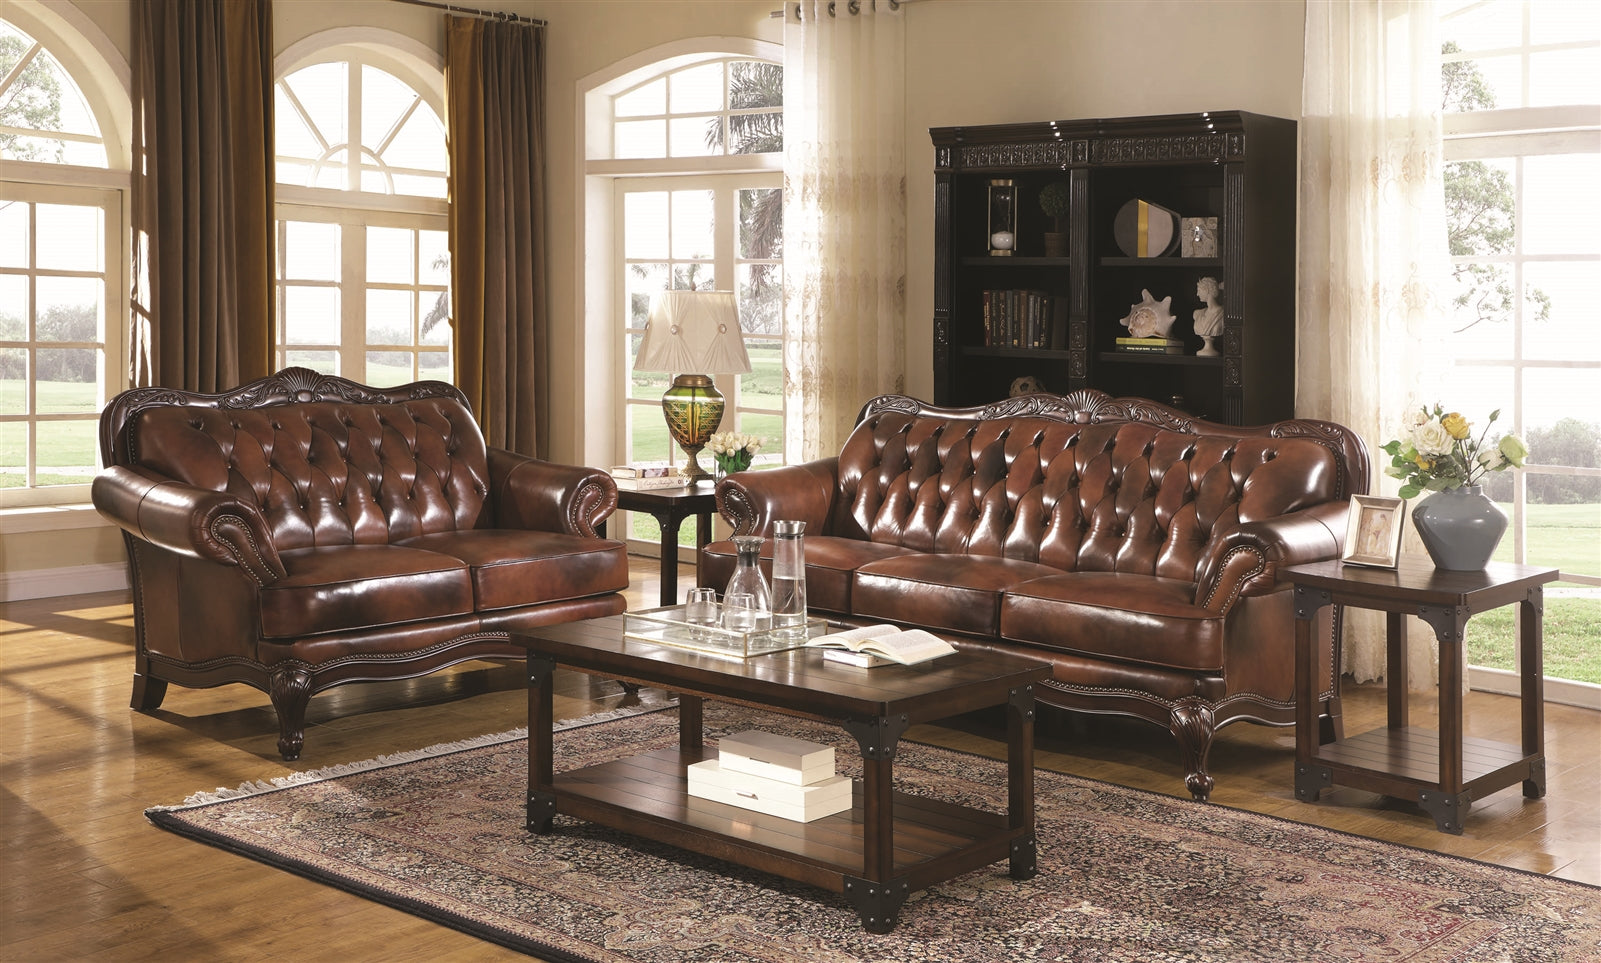 Marlo Traditional On Tufted Top Grain Leather Sofa With Claw Feet Finally Home Furnishings Llc